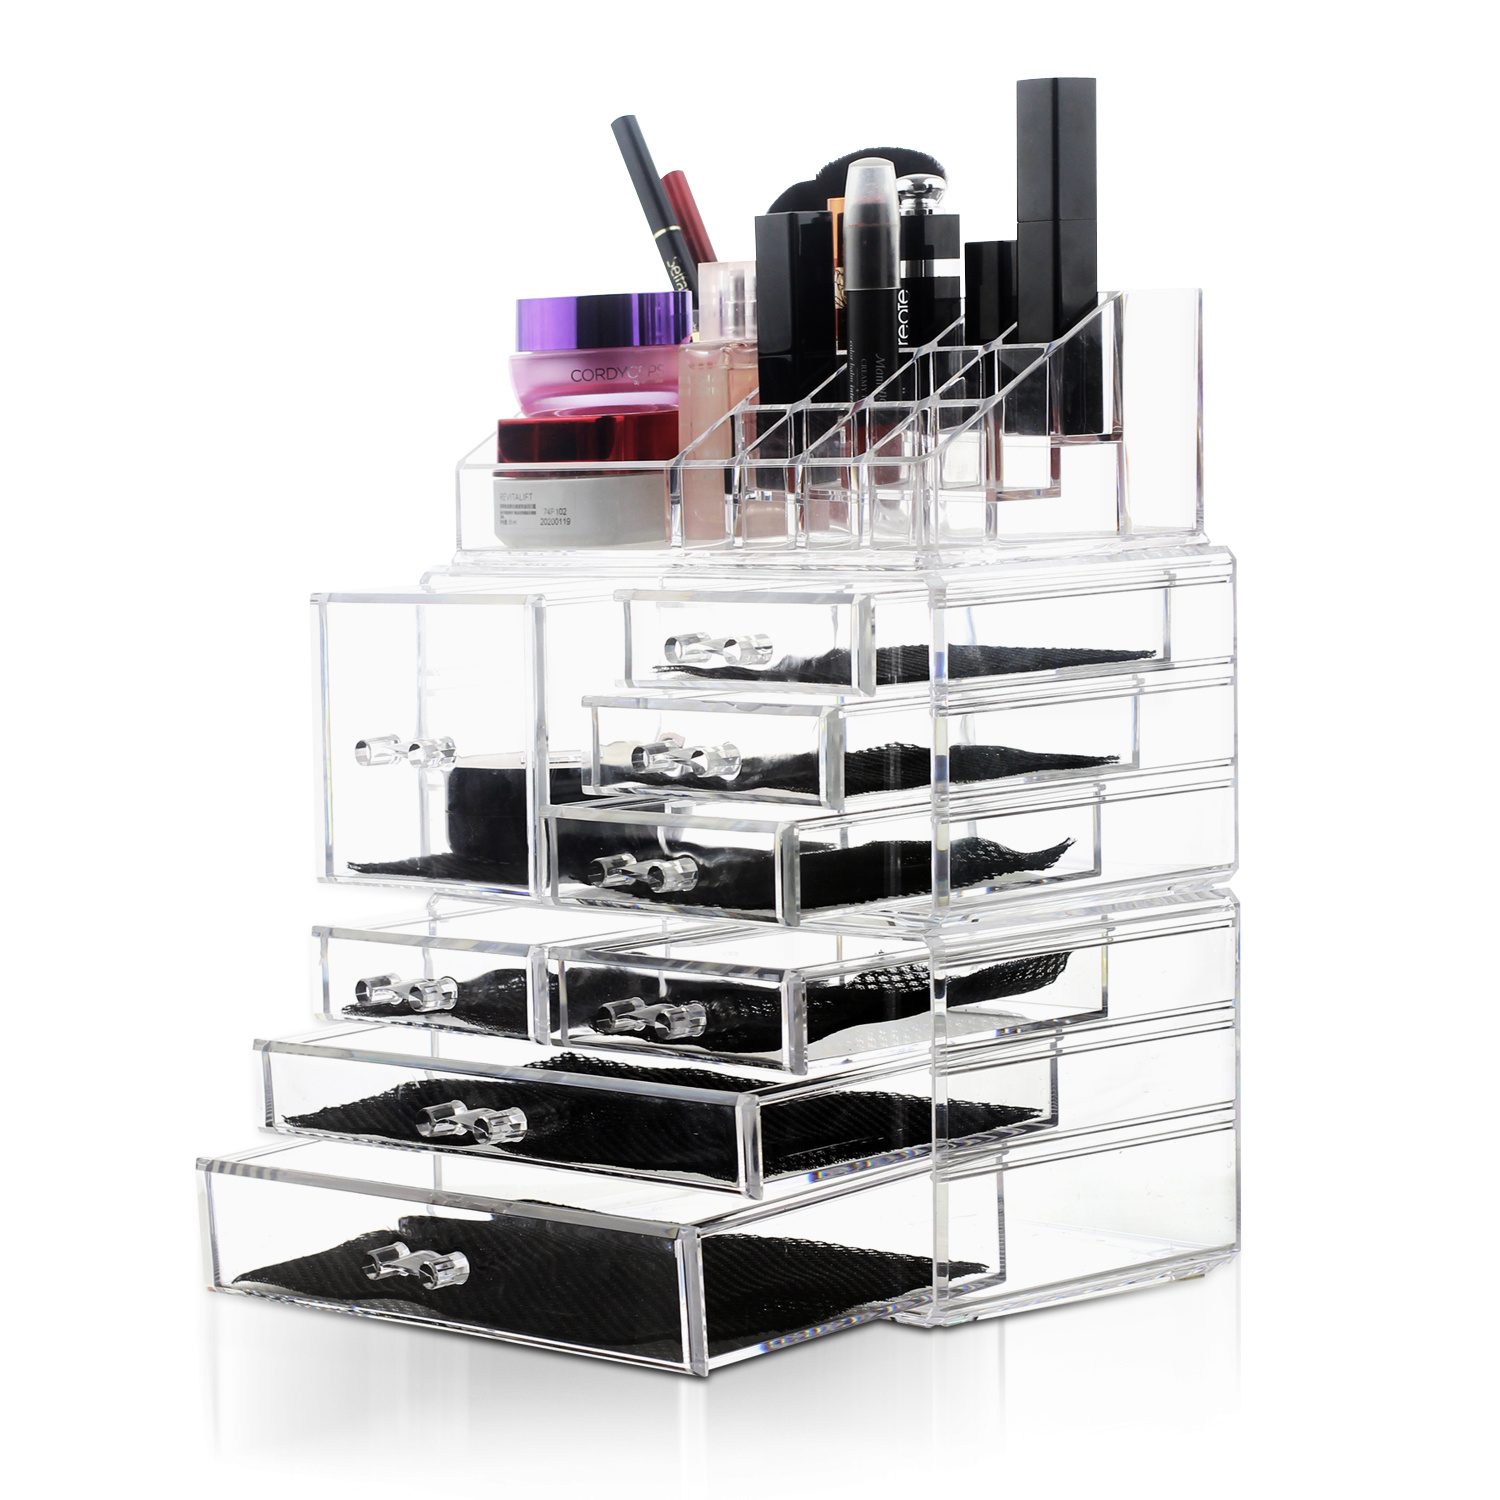 

Luxurious Deluxe 8-tier Premium Acrylic Makeup Organizer With Versatile Multi-compartment Storage Drawers For Cosmetics And Accessories